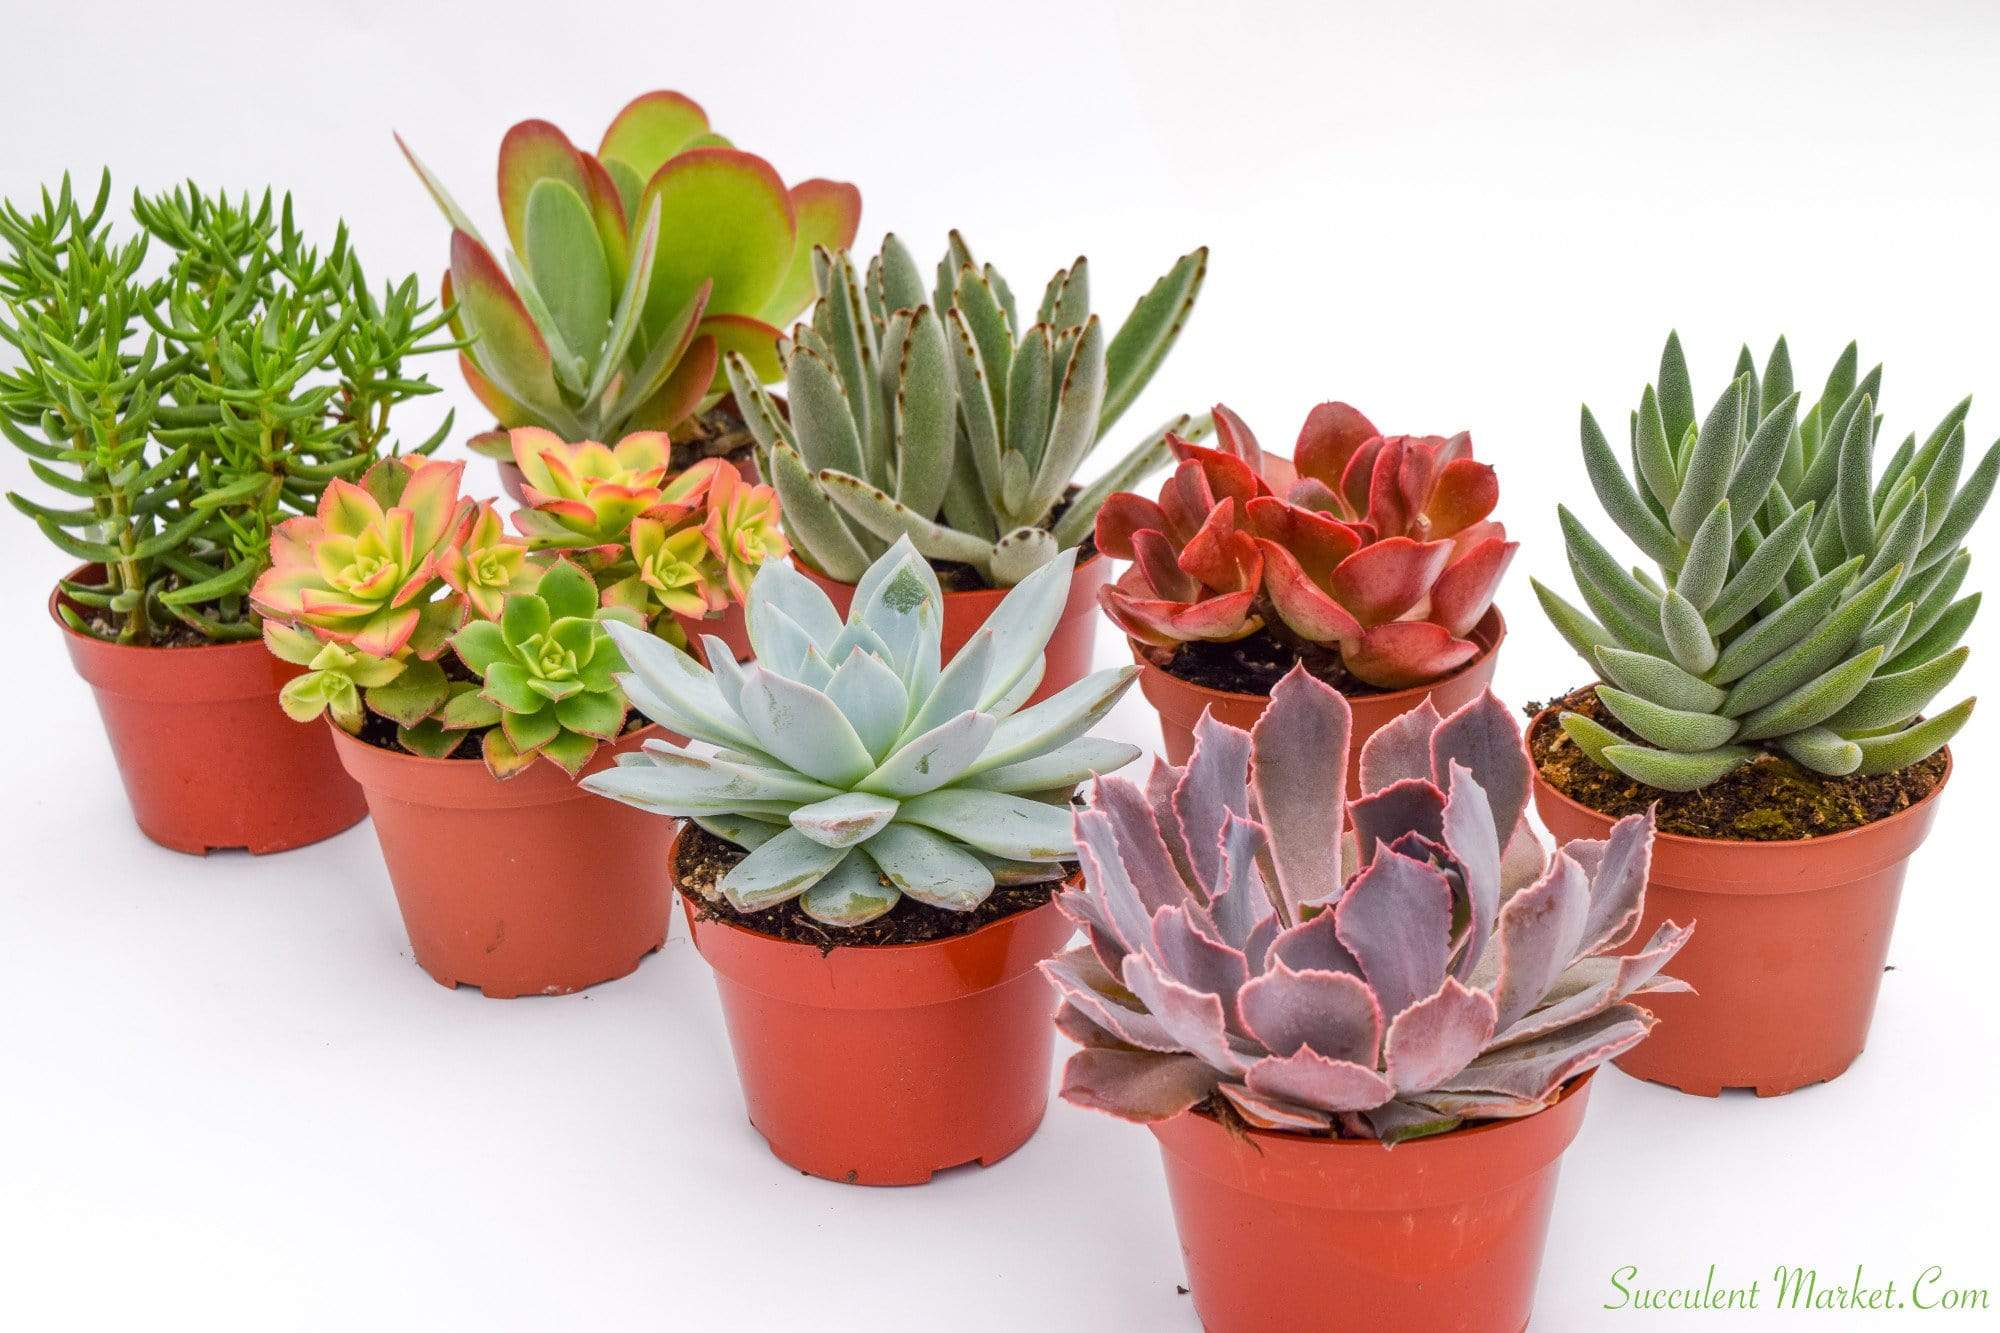 Colorful Succulents For Salebuy Succulents Onlinesucculents For Sale Succulent Market 9474